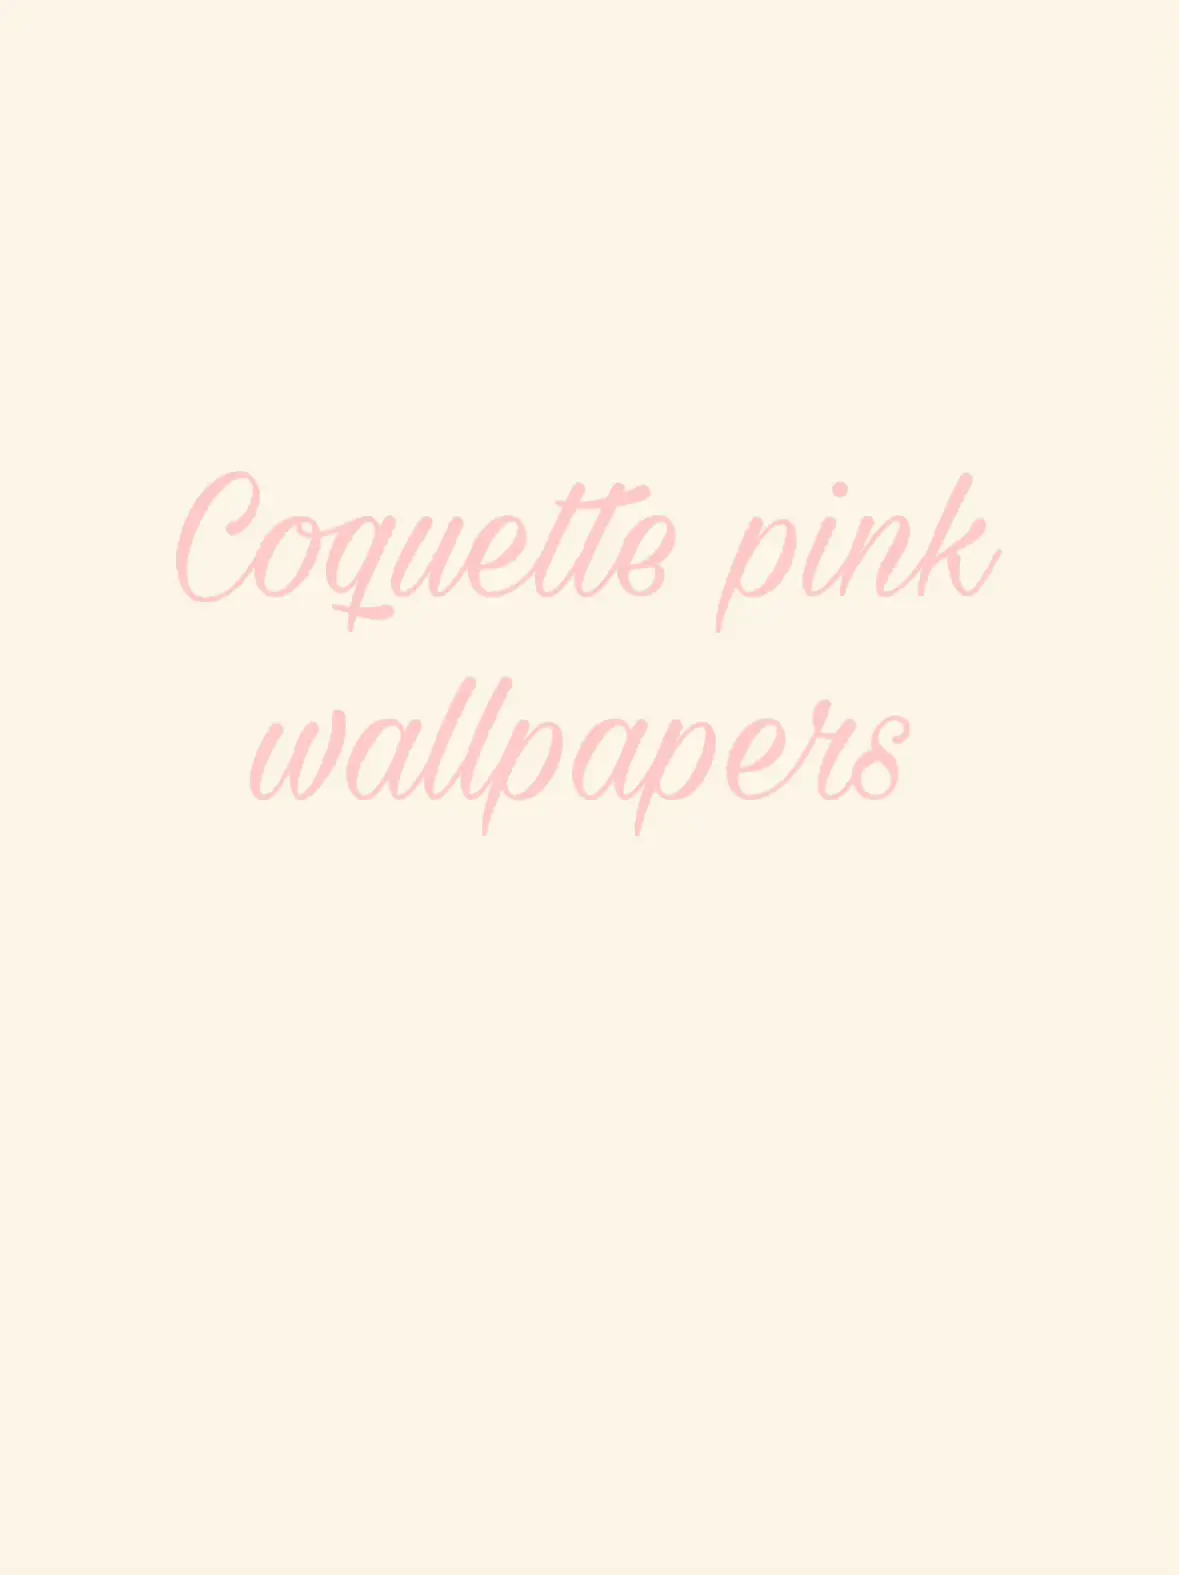 Coquette wallpaper 🎀🧁🪞, Gallery posted by Whos_Vtas2728